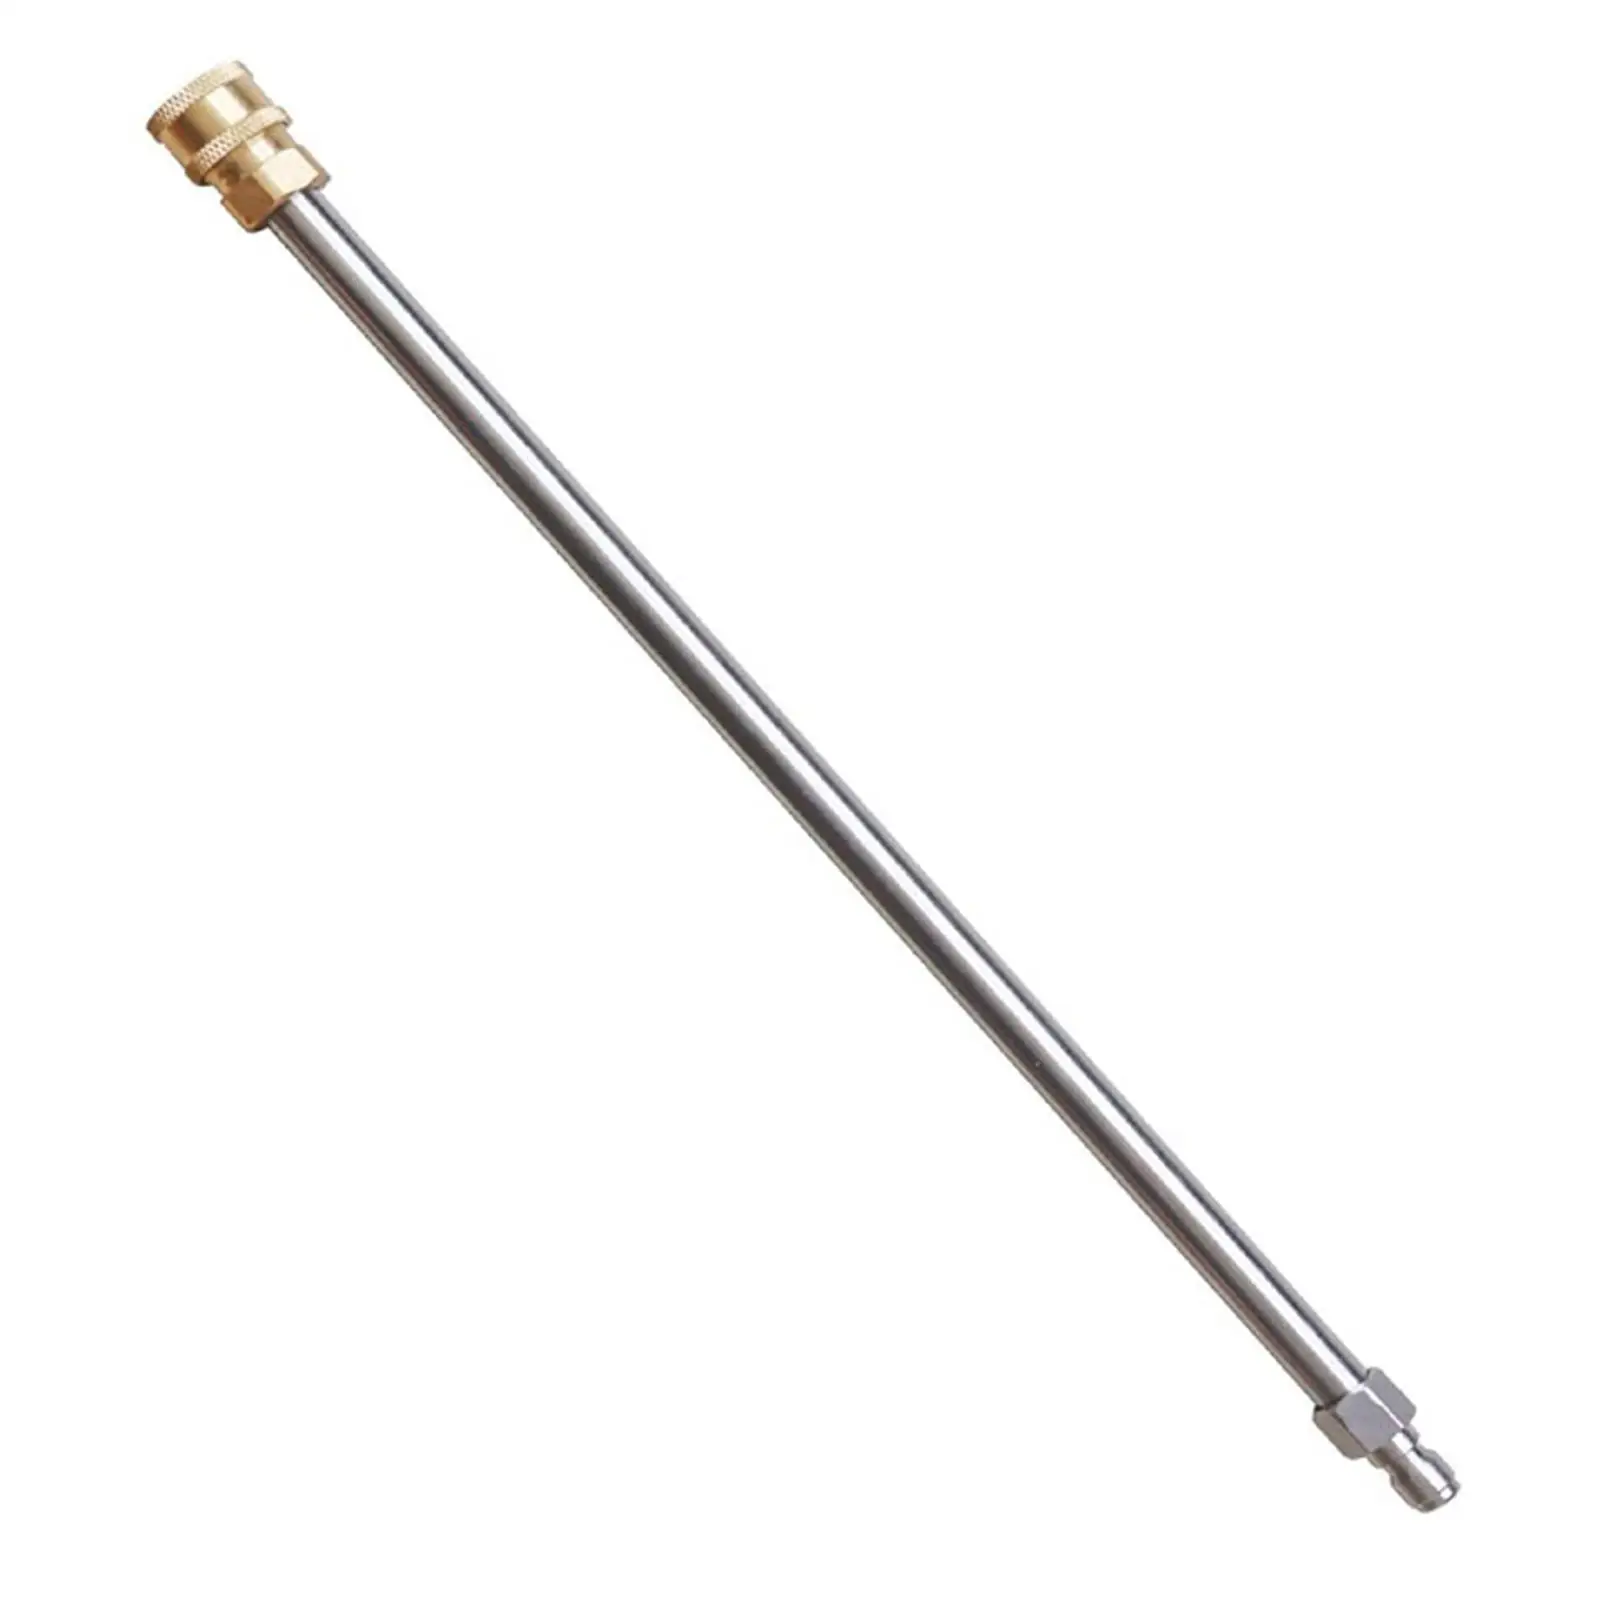 Pressure Washer Extension Wand Extension Pole Cleaning 4000 PSI Anti Leaked Rings Replacement Lance Roof Walkway Driveway Car